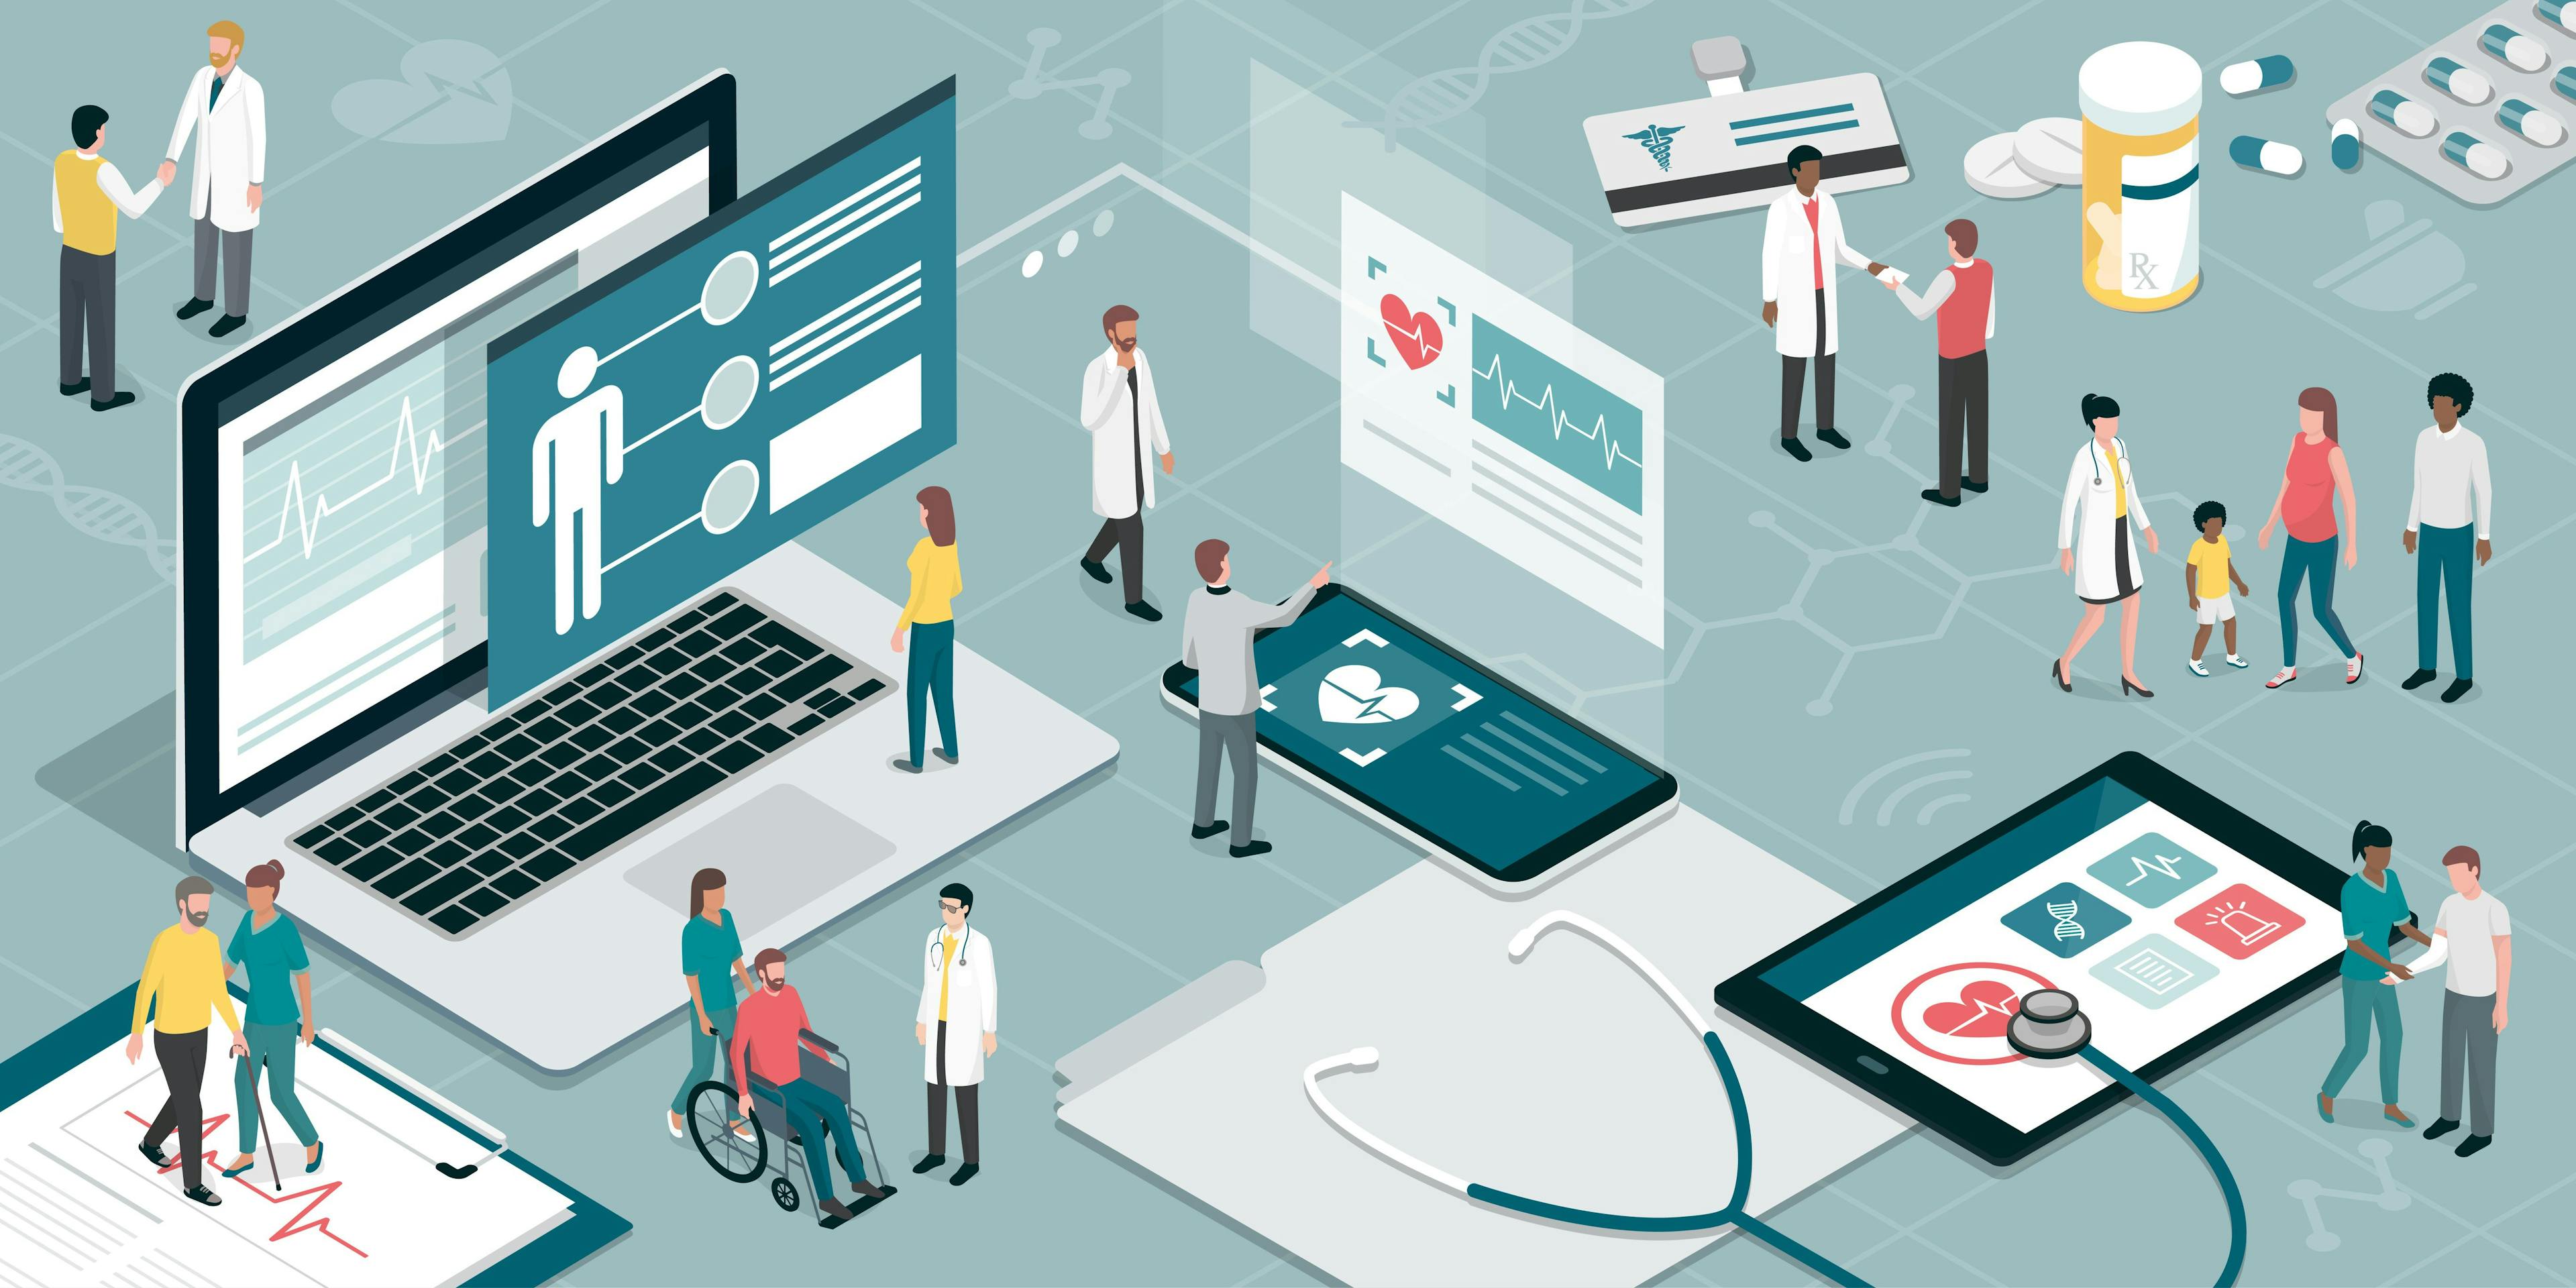 Data Analytics Help Specialty Pharmacies Personalize Health Care 